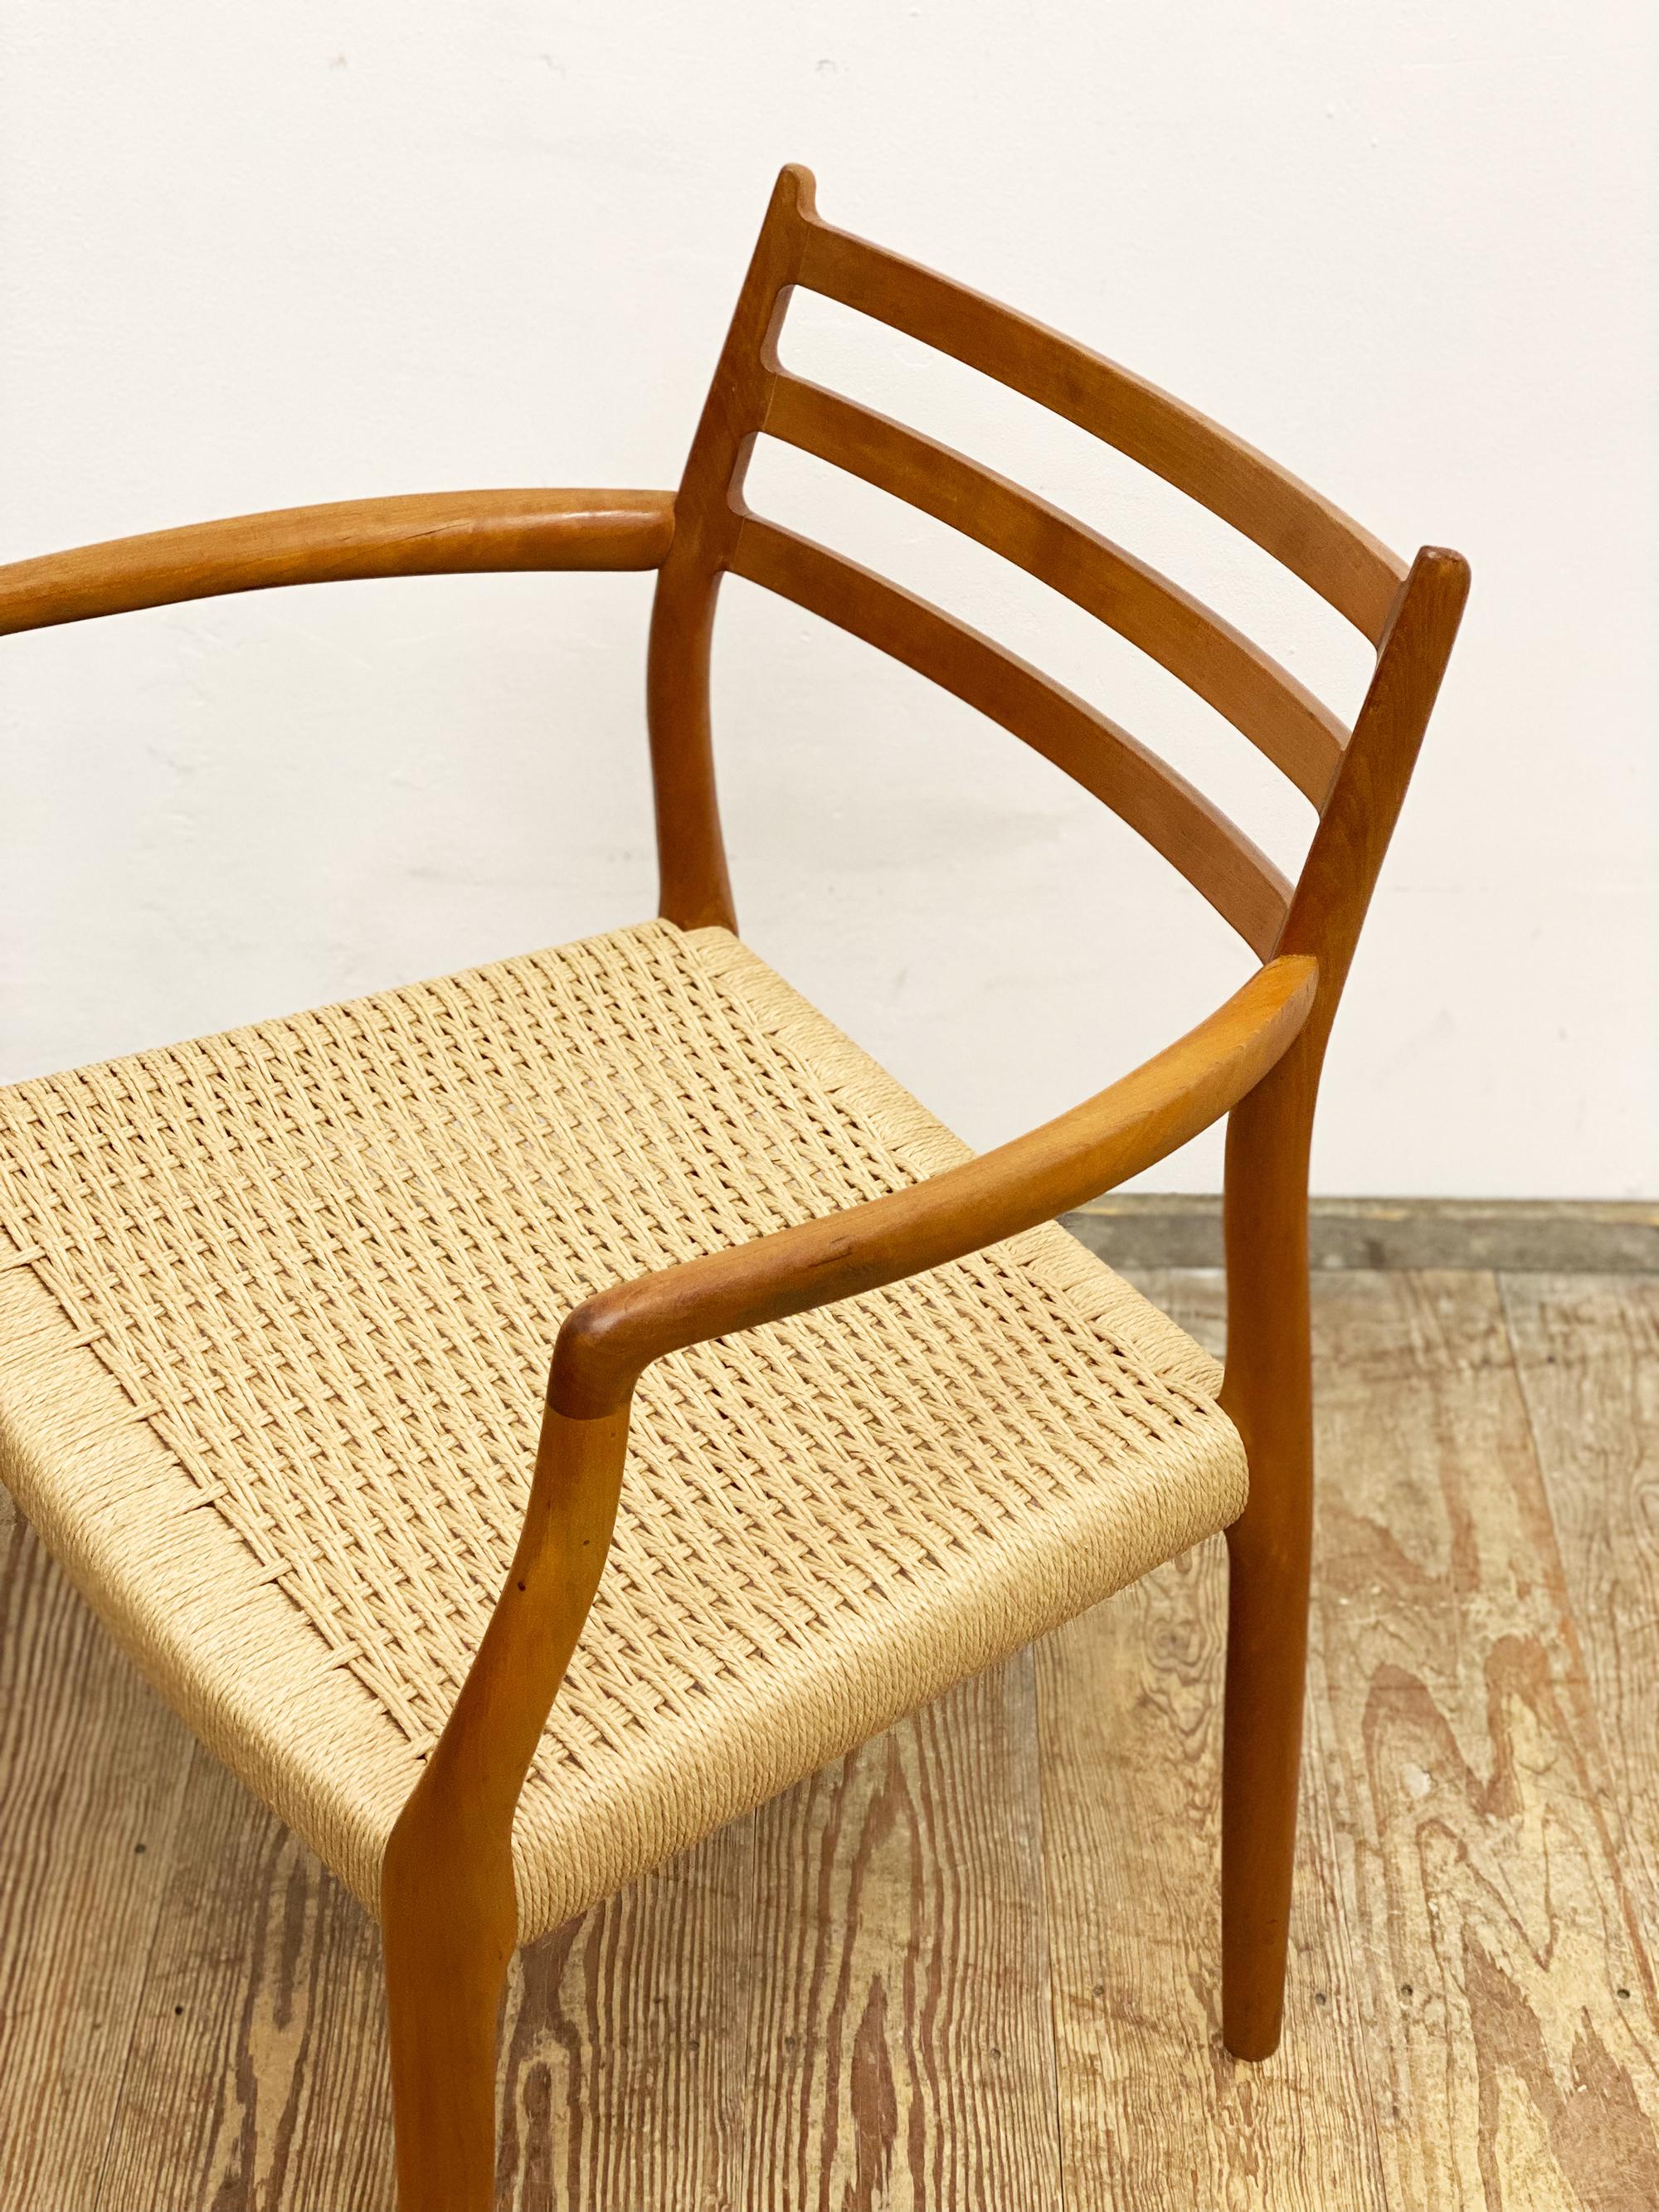 Mid-20th Century 3 Mid-Century Teak Dining Chairs #62 by Niels O. Møller for J. L. Moller